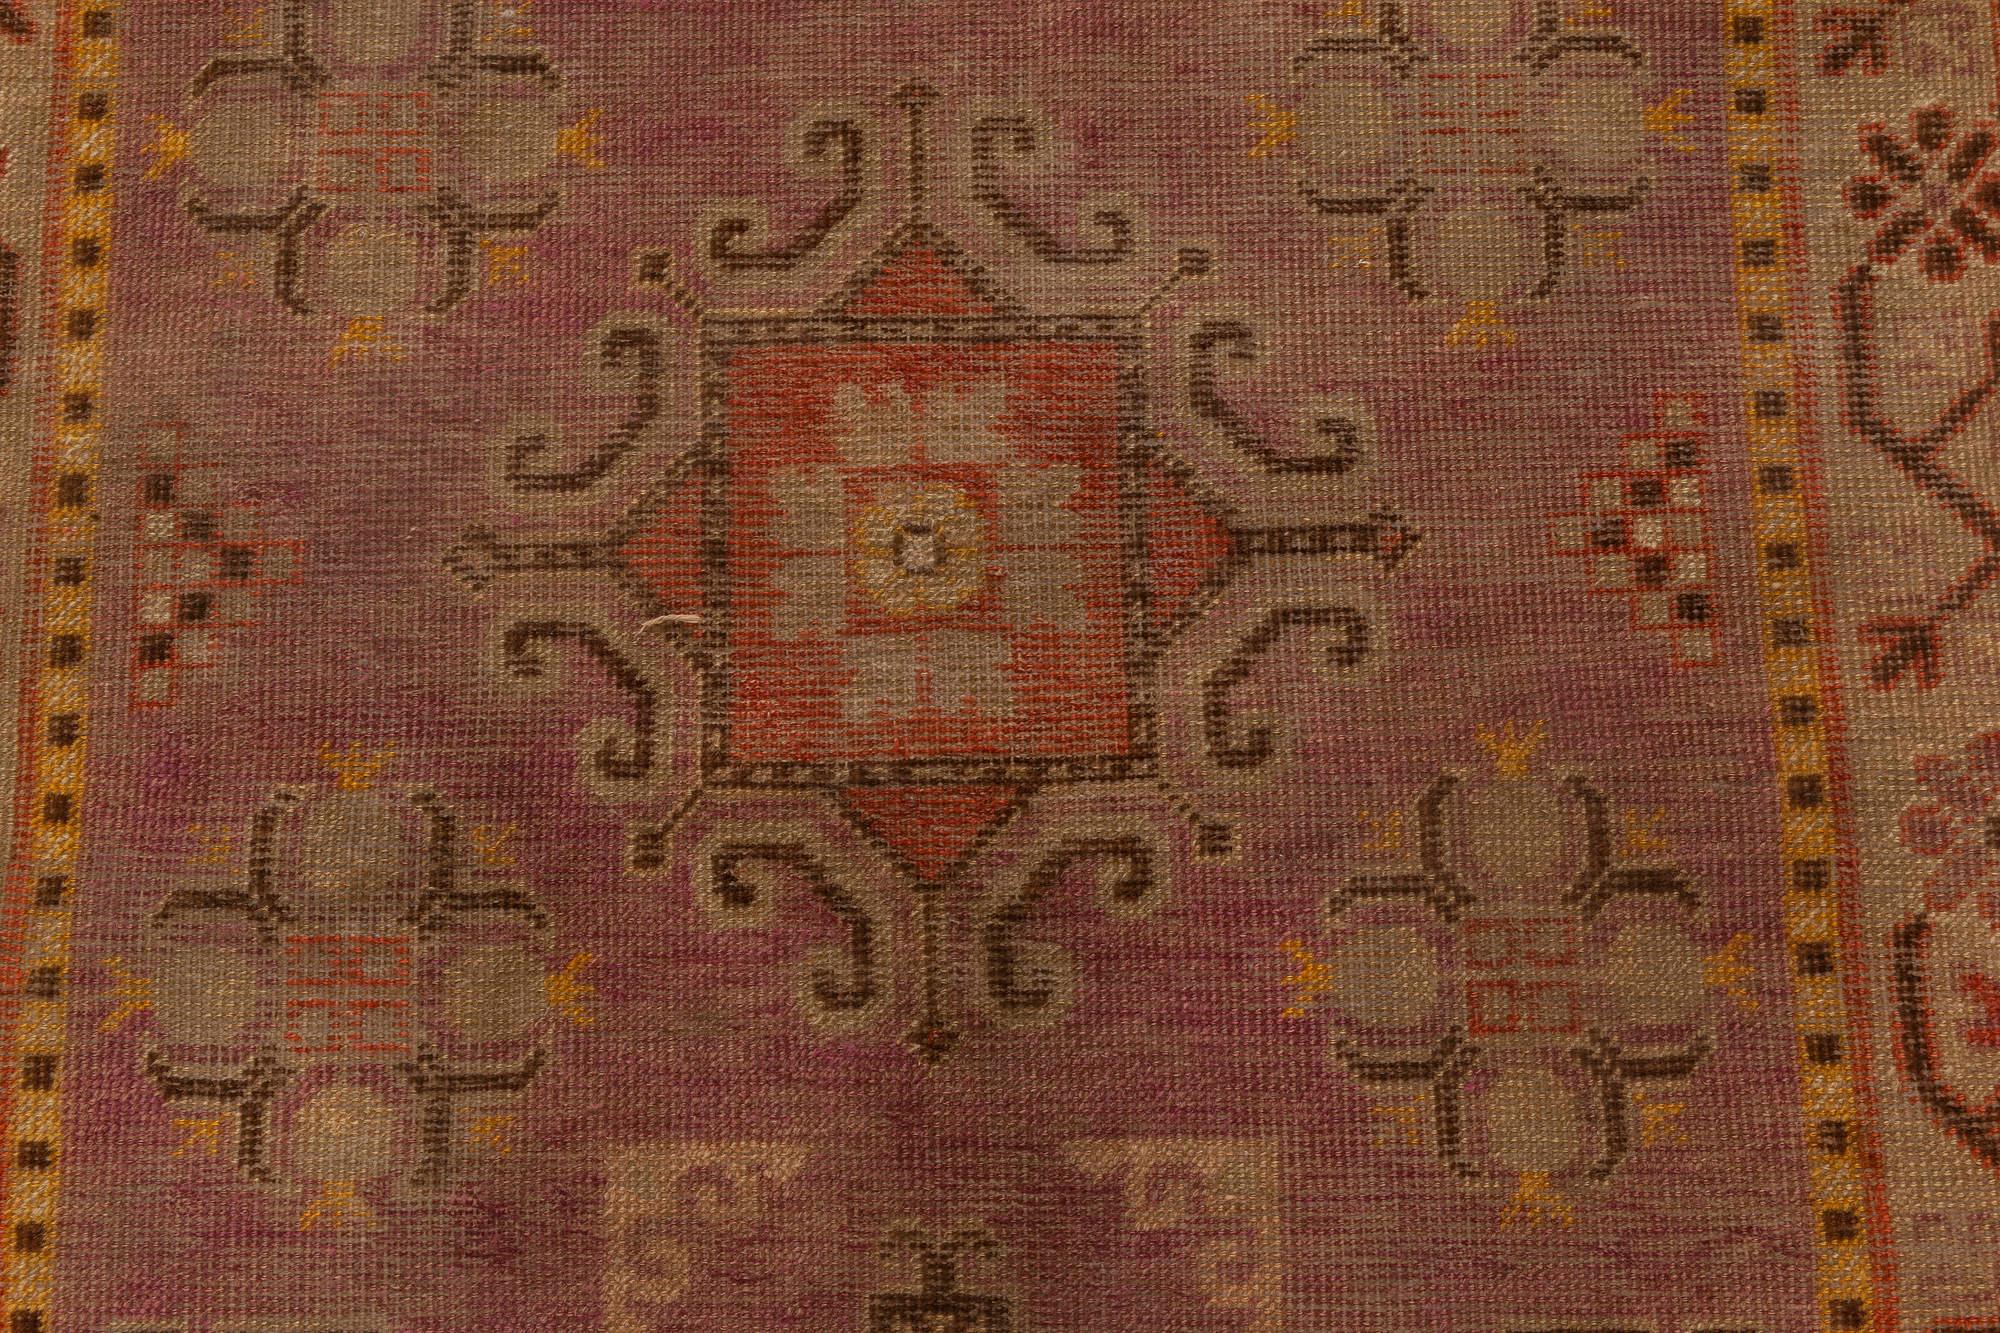 Midcentury Samarkand purple and brown hand knotted wool rug.
Size: 3'4